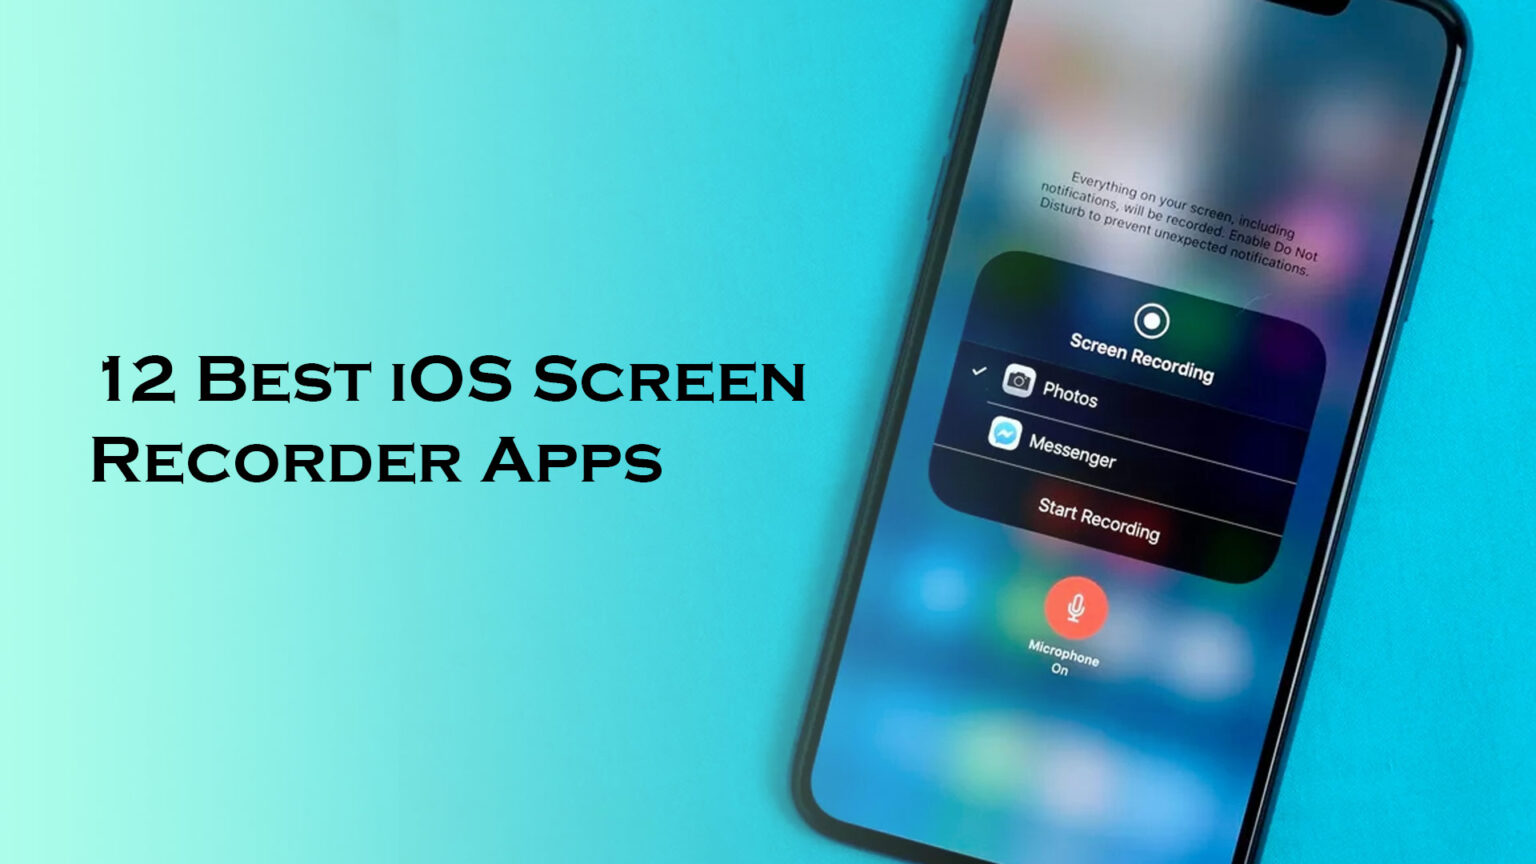 How to get screen recorder on ipad